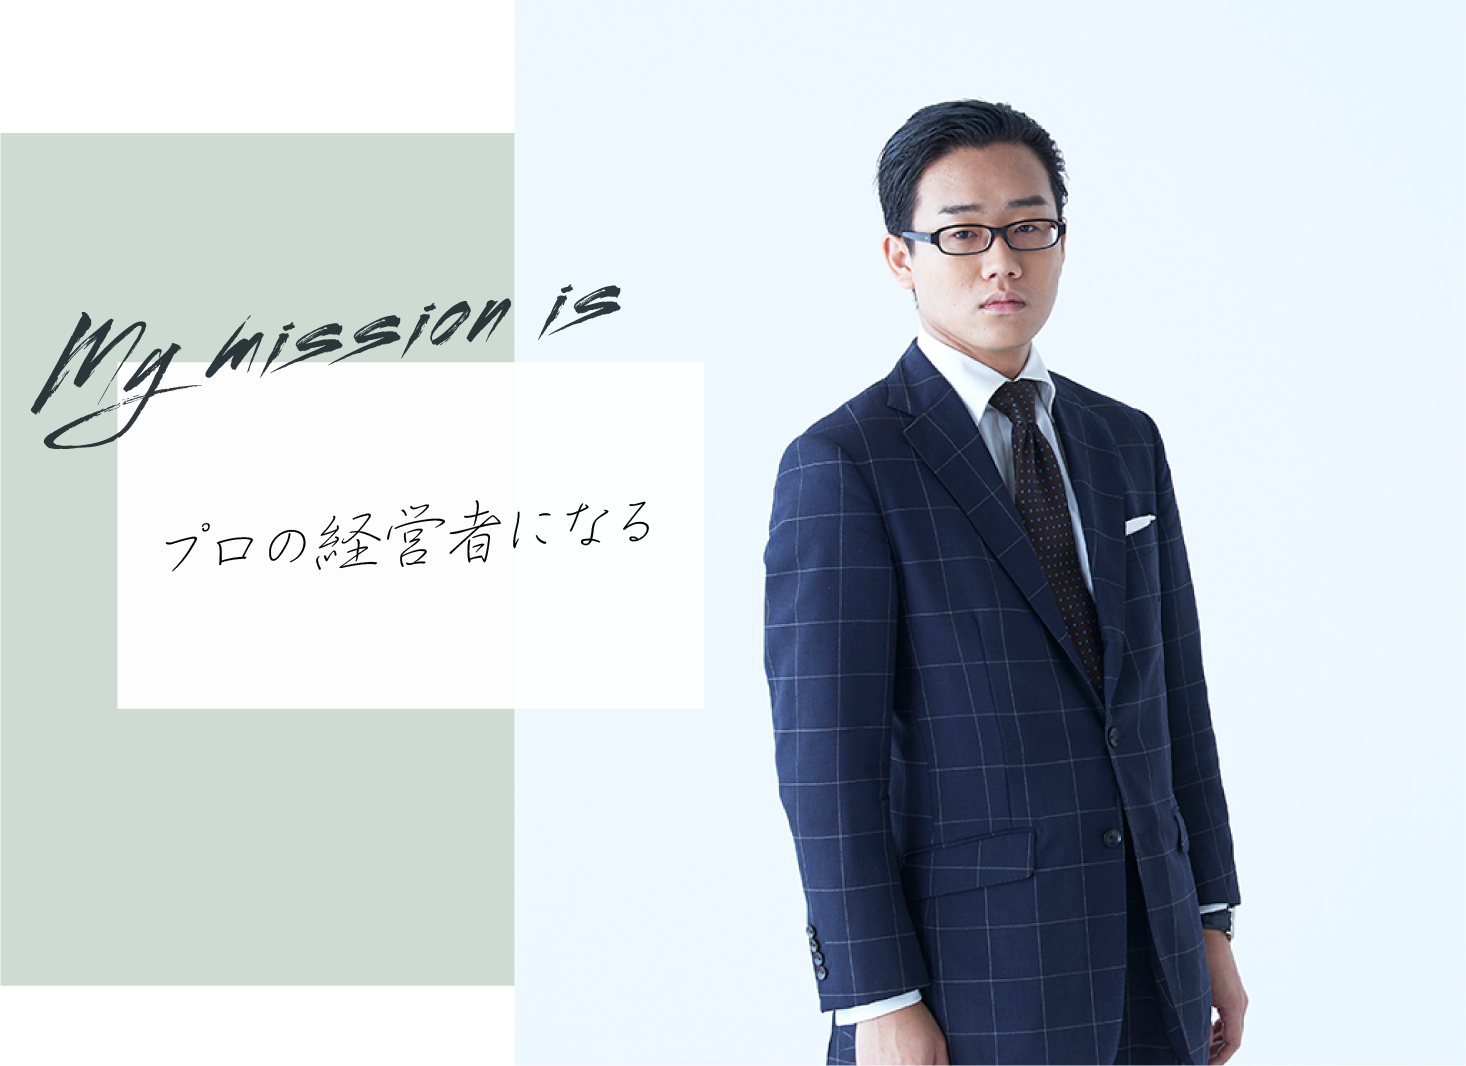 my mission isプロの経営者になる、春田 弘輔